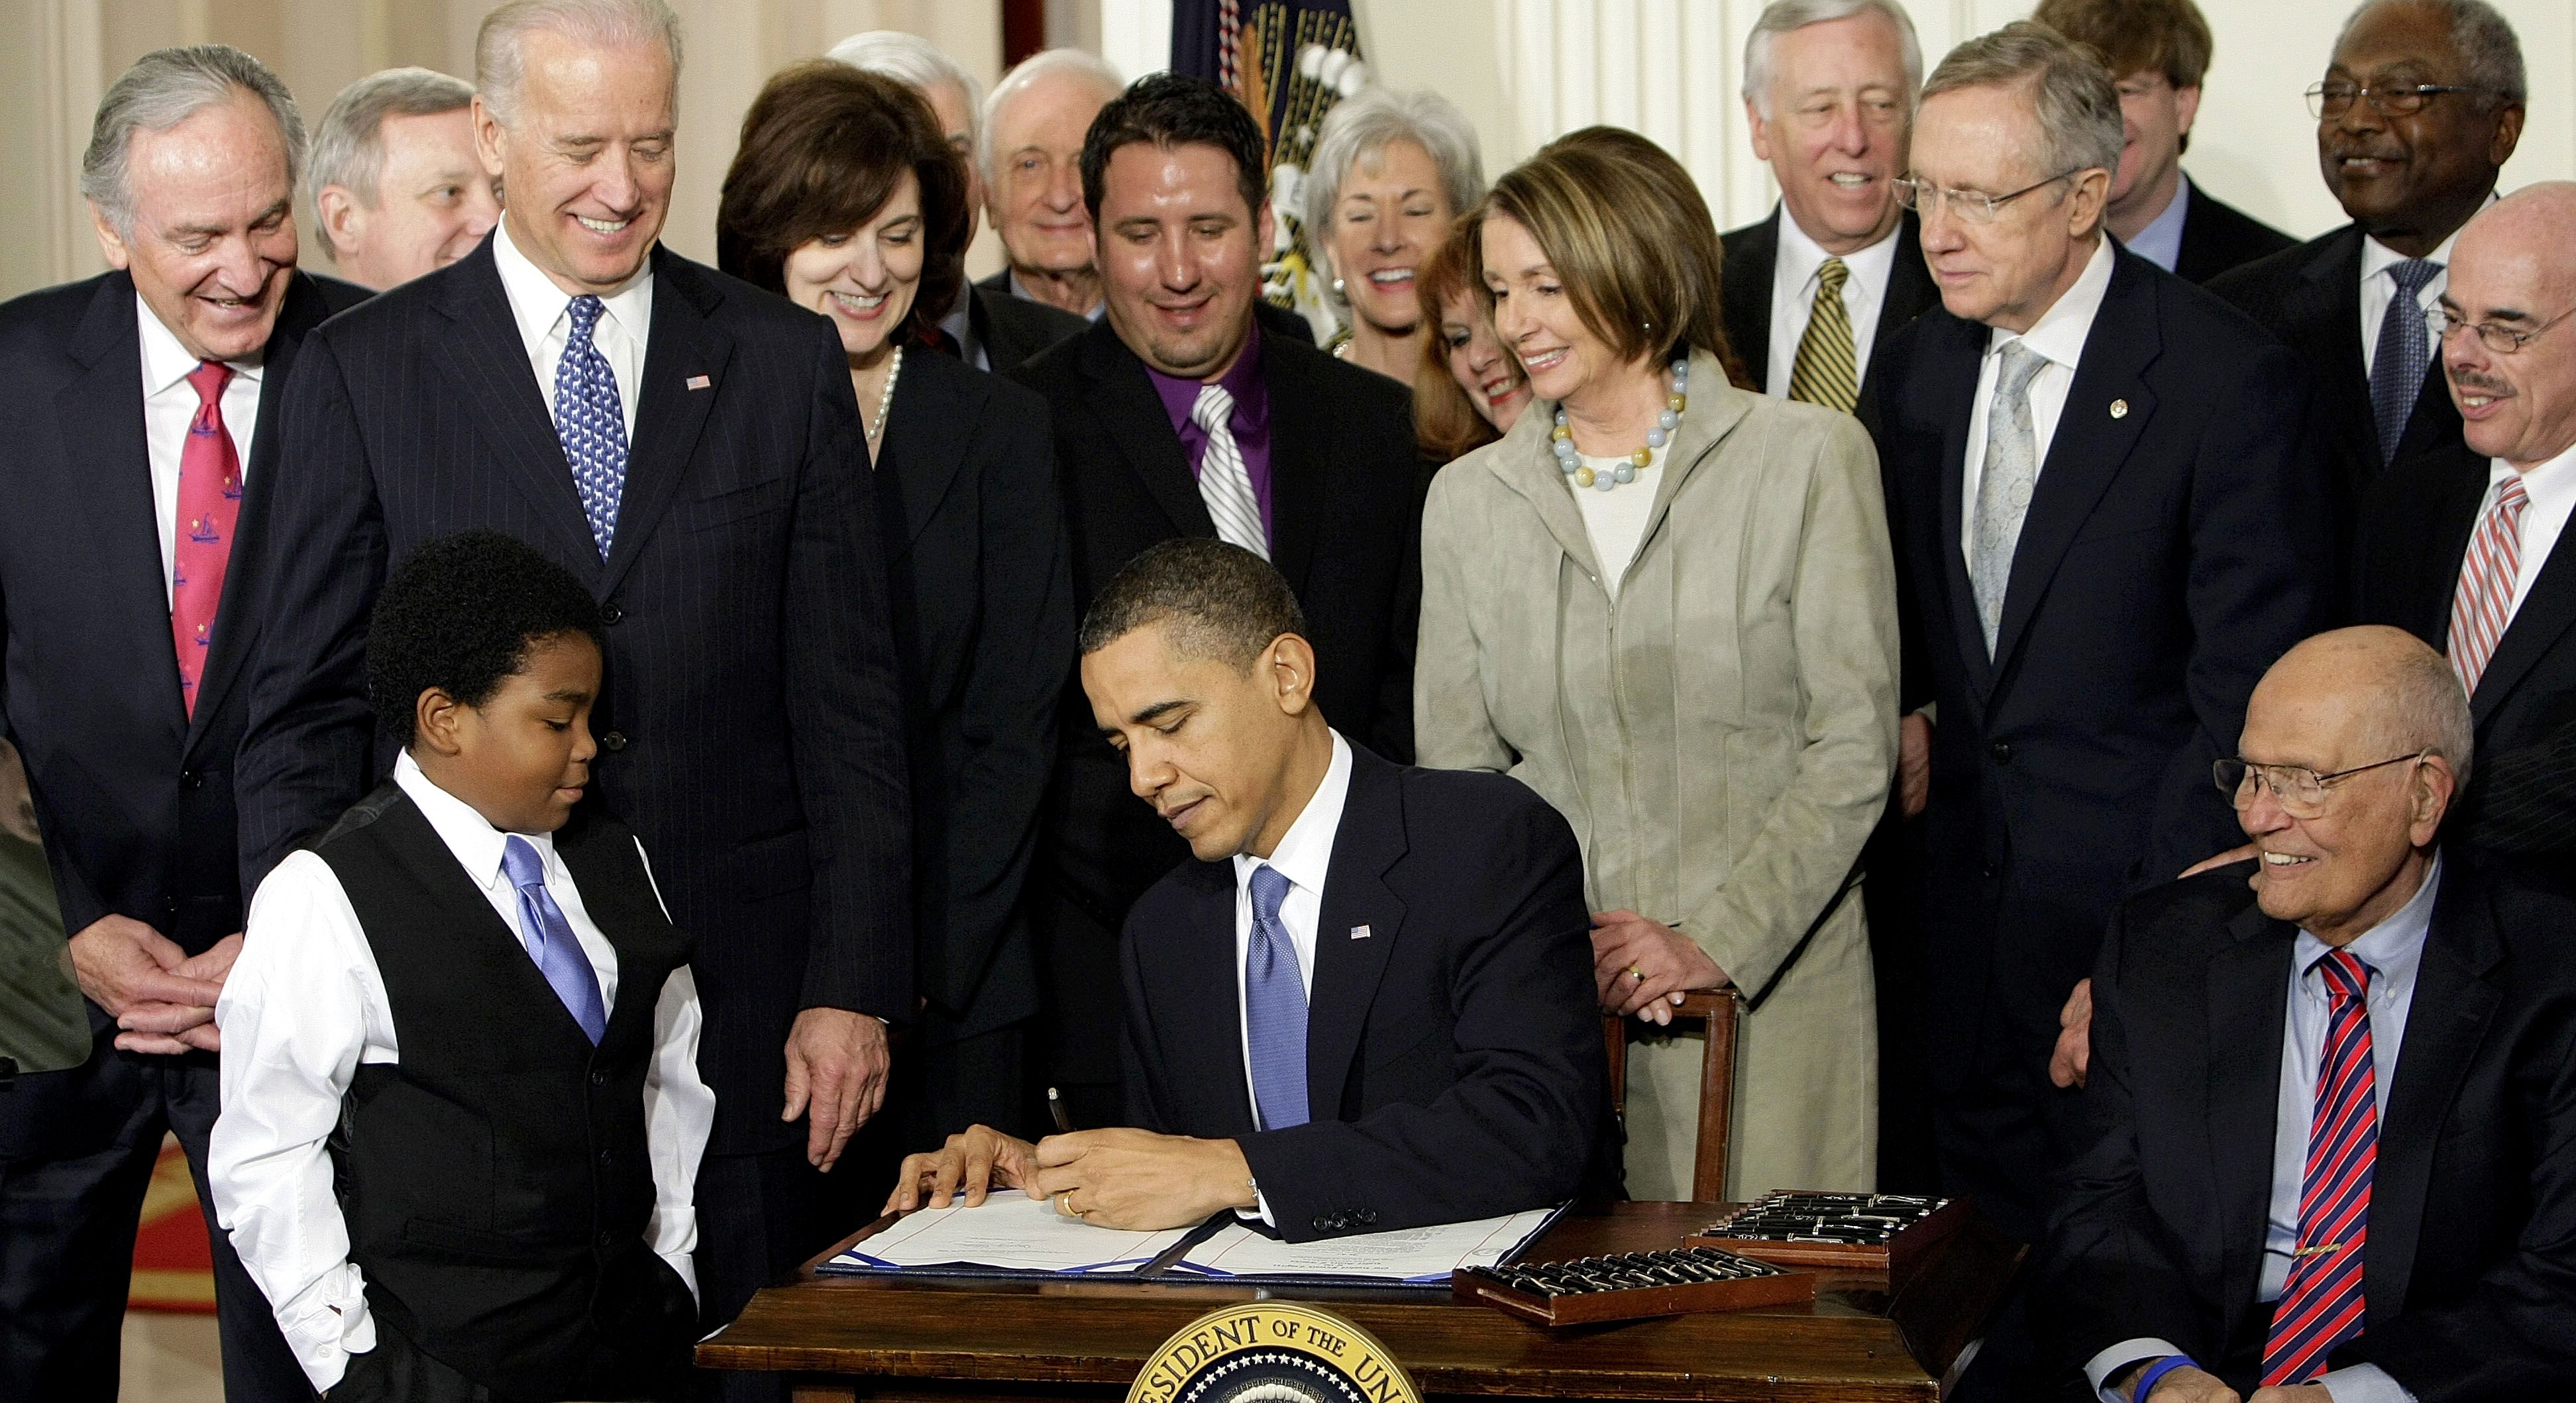 Obama signing Affordable Care Act